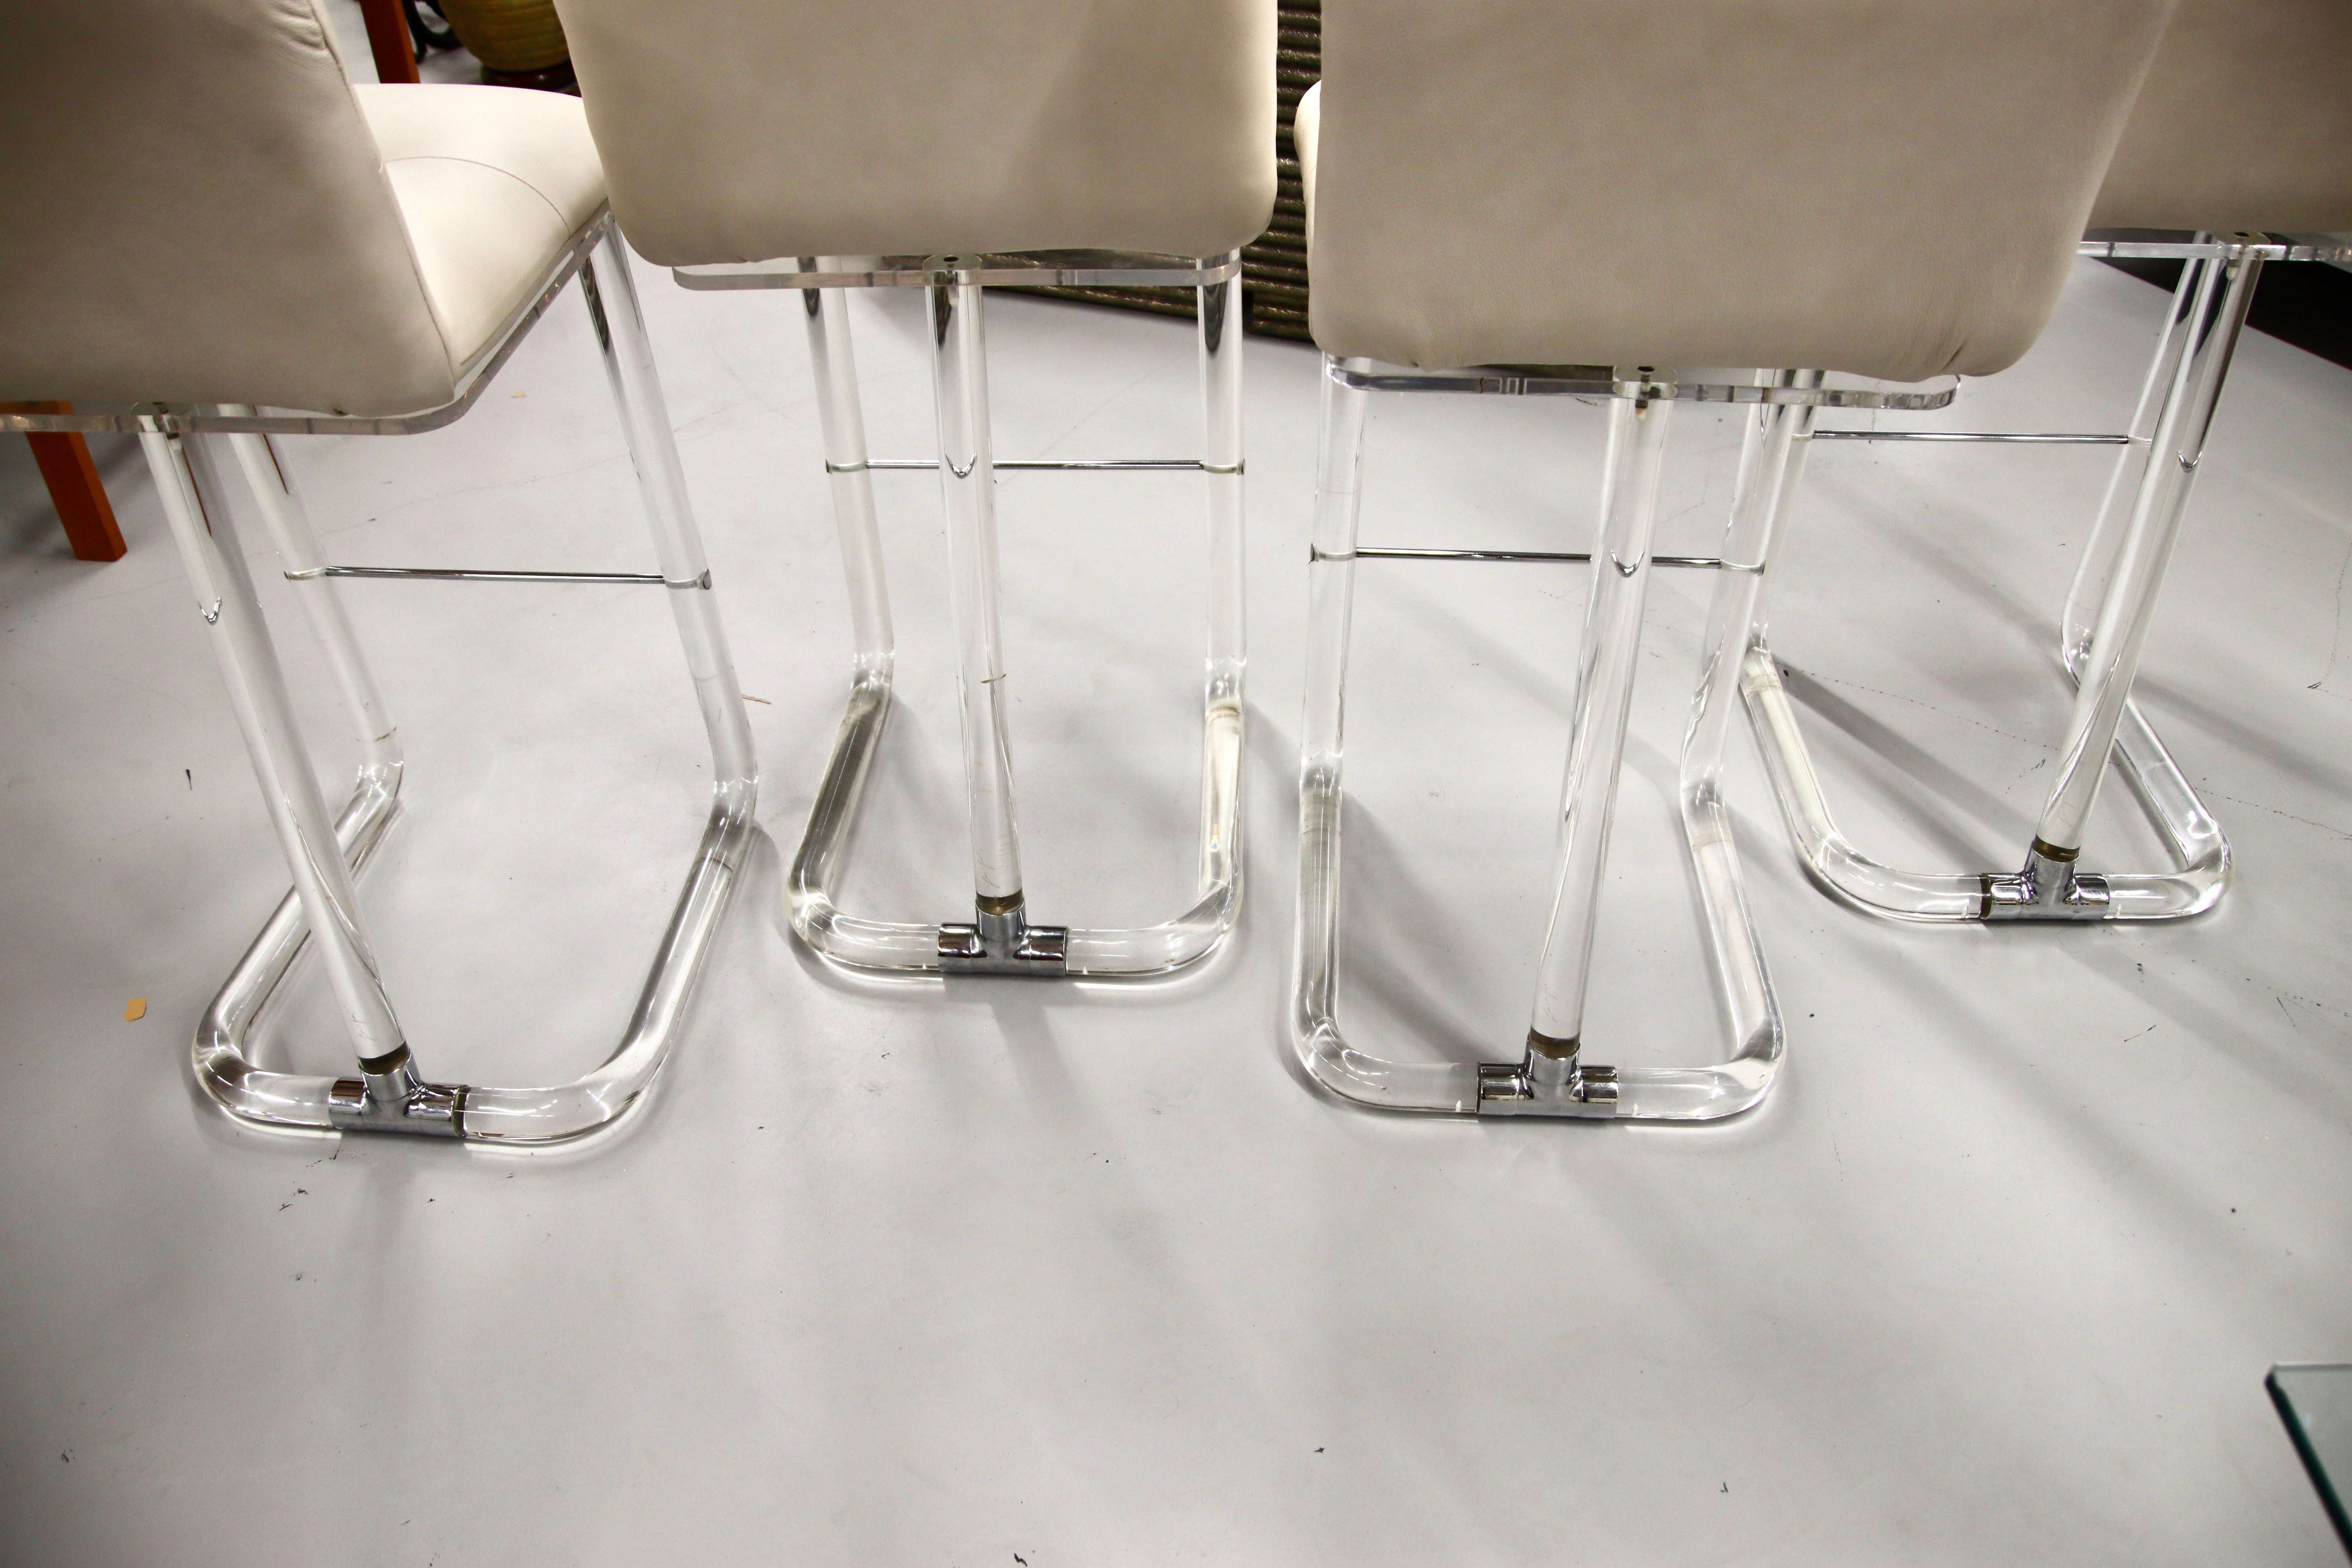 A set of 4 vintage Lucite Lion in Frost bar stools from the 1970s re-upholstered in an Ivory or off-white leather. They swivel as well. In good condition with some minor age and use related marks. Seat height is approximately 30 inches.